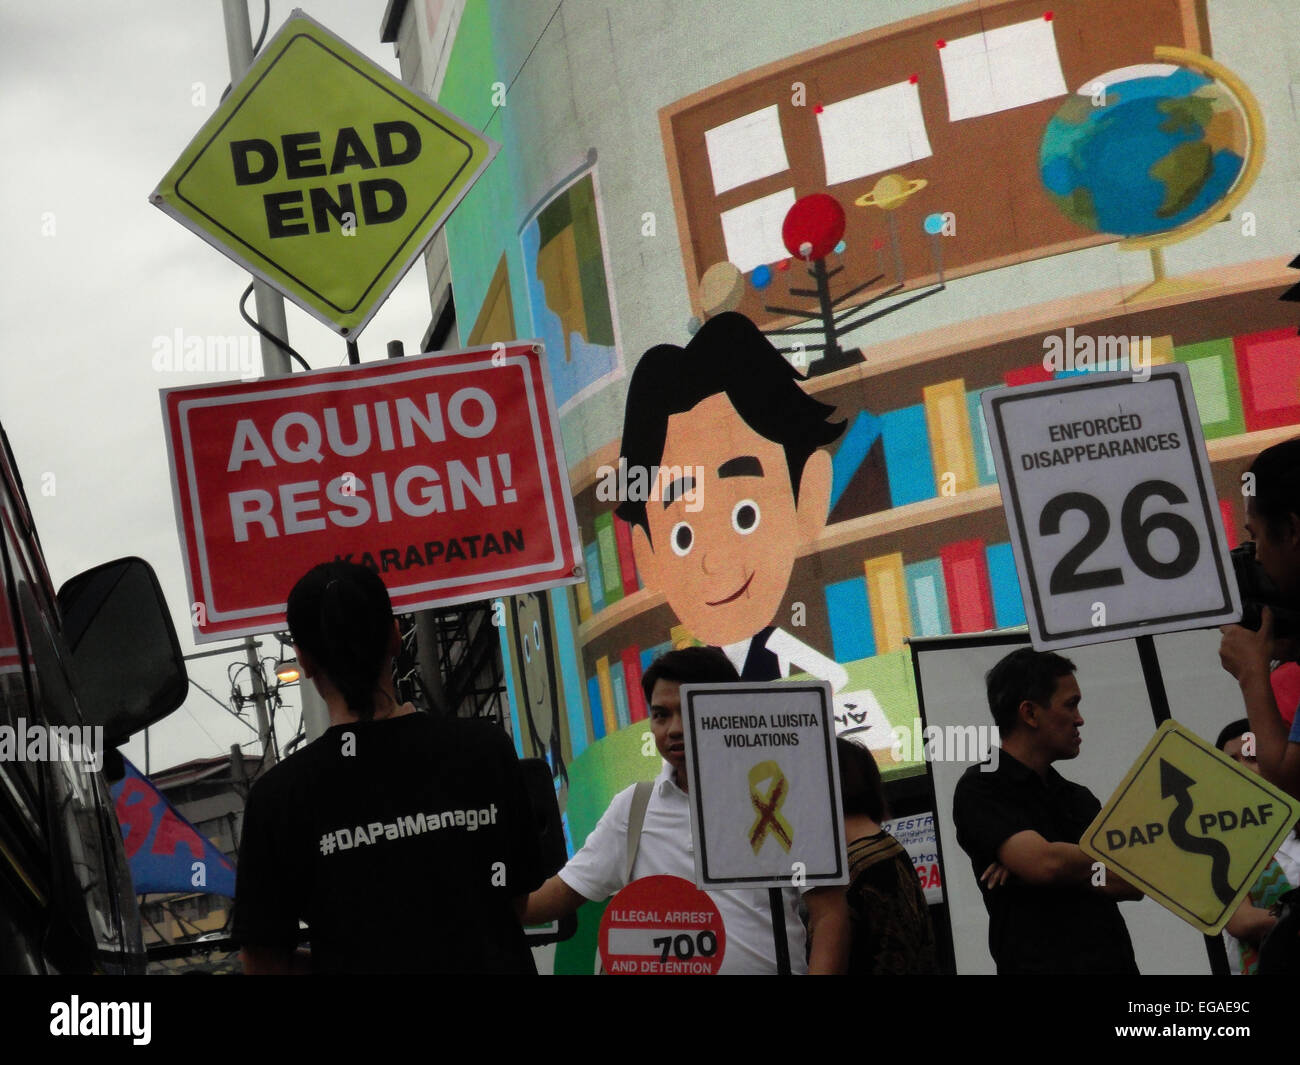 An activist carries a dead end sign above a sign calling for President Benigno Aquino III to resign, as she walks along a mock yellow road symbolizing President Aquino's 'Tuwid na Daan' (Straight Path) platform, during a rally at the Plaza Miranda in Quiapo. Activists held a 'People's Hearing' on the Mamasapano incident, where they reported on the findings of a fact-finding mission about the incident, where 44 policemen, 18 Muslim rebels, and 7 civilians were killed in a botched anti-terror operation that reportedly killed Malaysian bombmaker Zulkifli 'Marwan' Abdhir. (Photo by Richard James Stock Photo